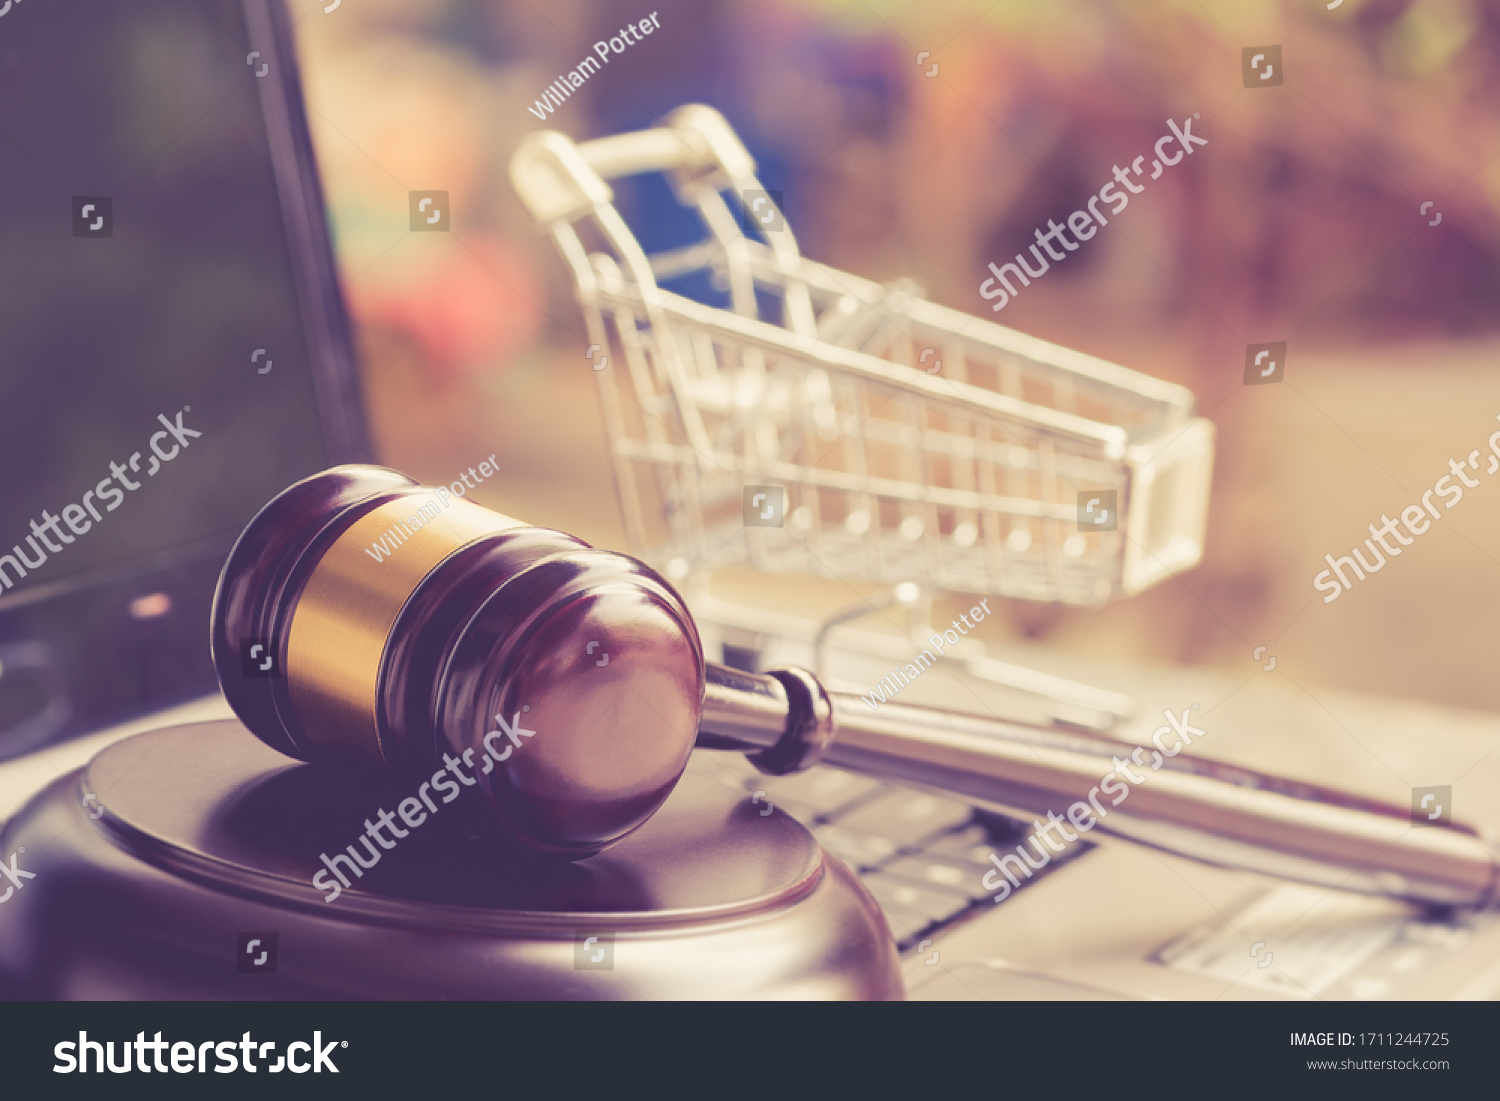 E-commerce law, rules and regulations concept : Wooden judge gavel and shopping cart on a laptop, depicts good practice vendor must do for consumer e.g provide clear data, order cancellation, refund #1711244725